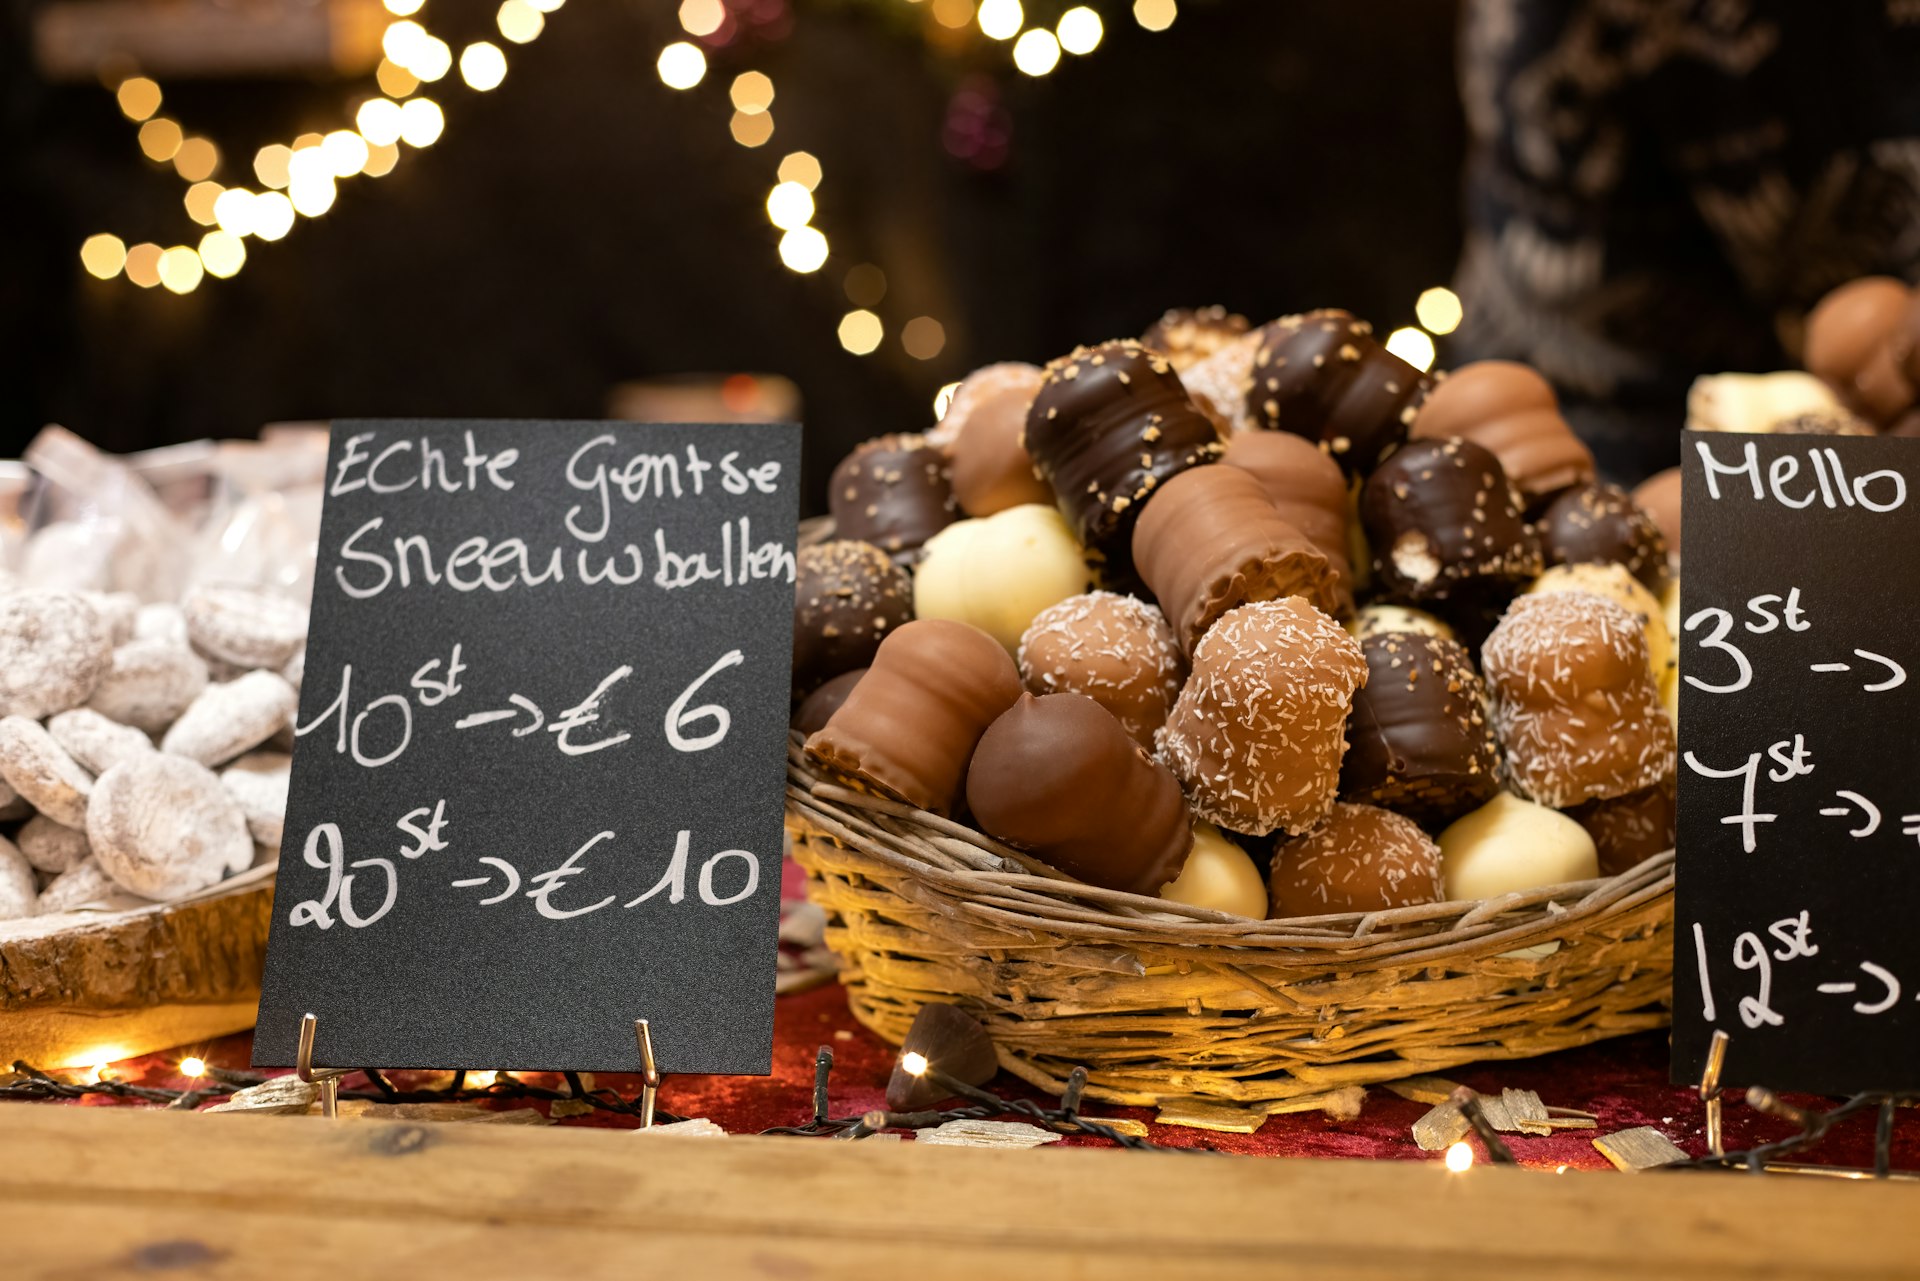 "Gentse sneeuwballen" - typical Belgium chocolates at the Christmas market in centrum of Ghent